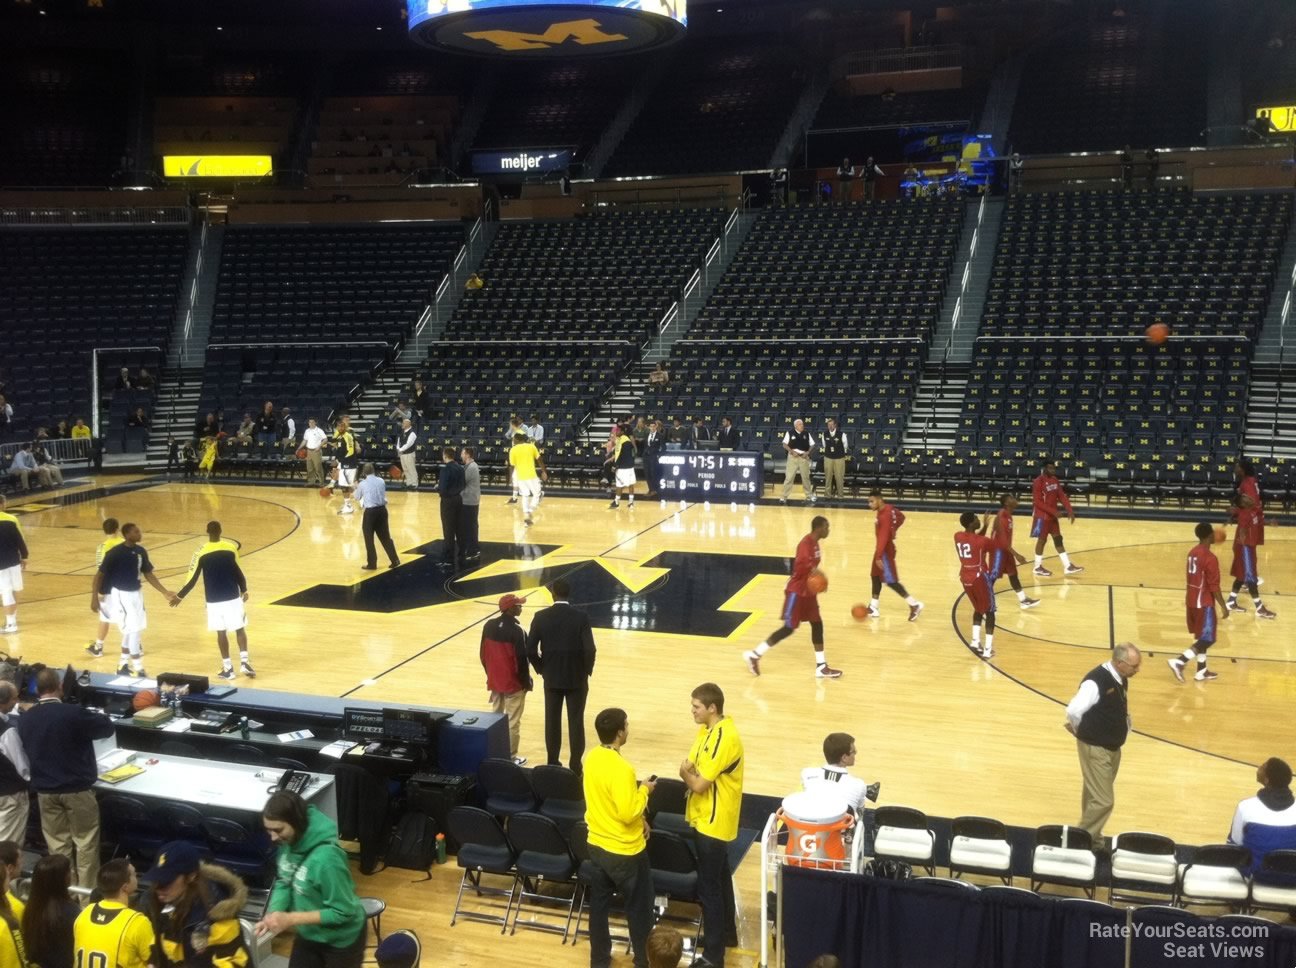 section 122, row 8 seat view  - crisler center